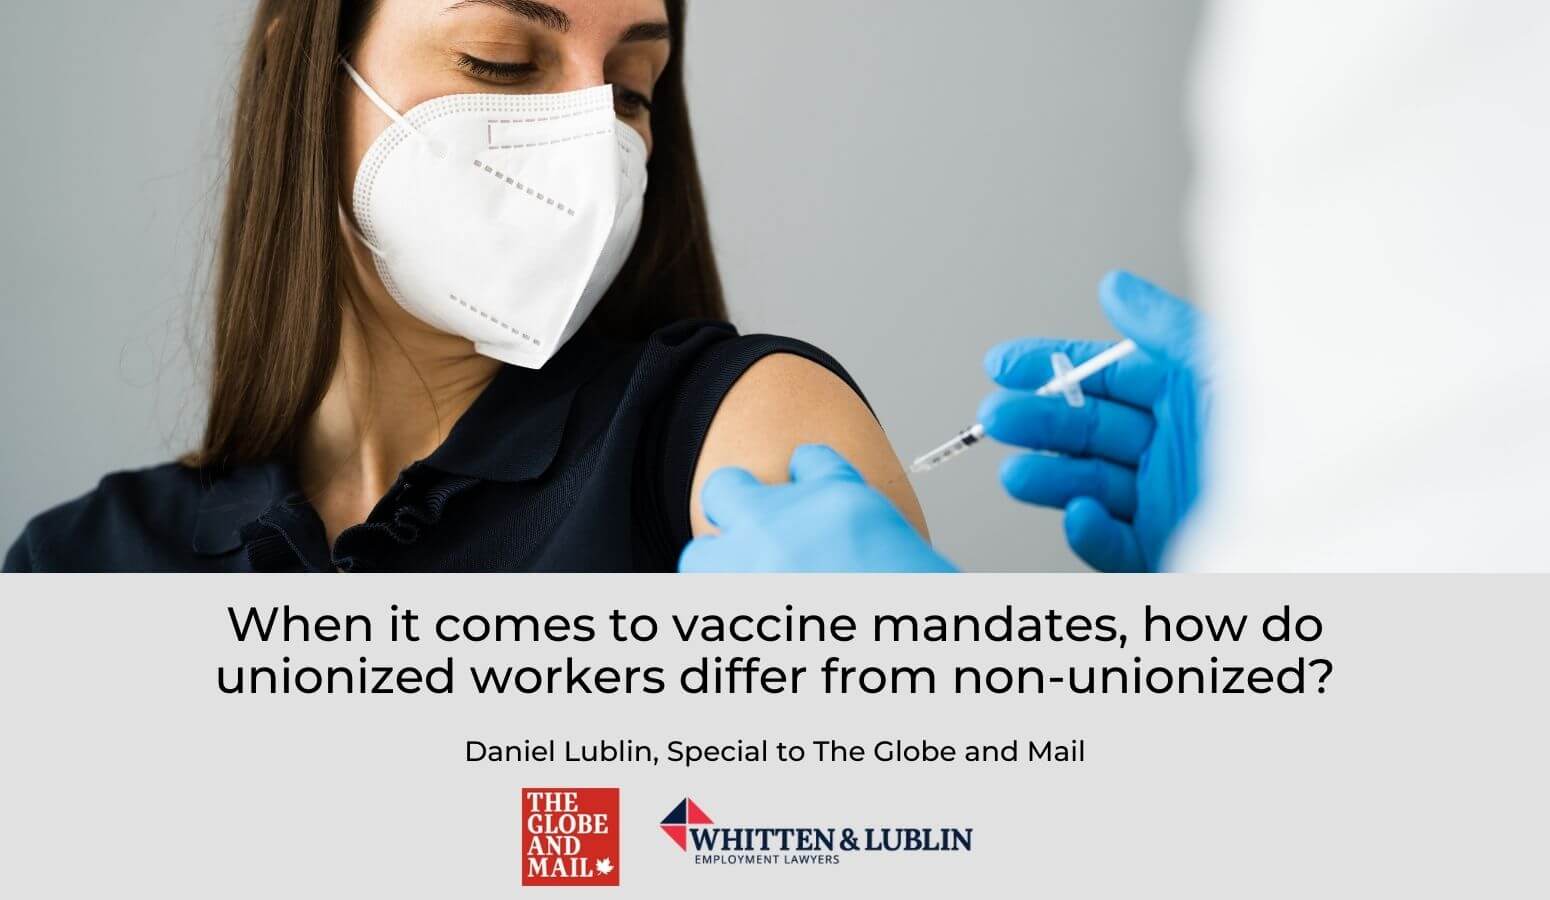 Featured image for “When it comes to vaccine mandates, how do unionized workers differ from non-unionized?”